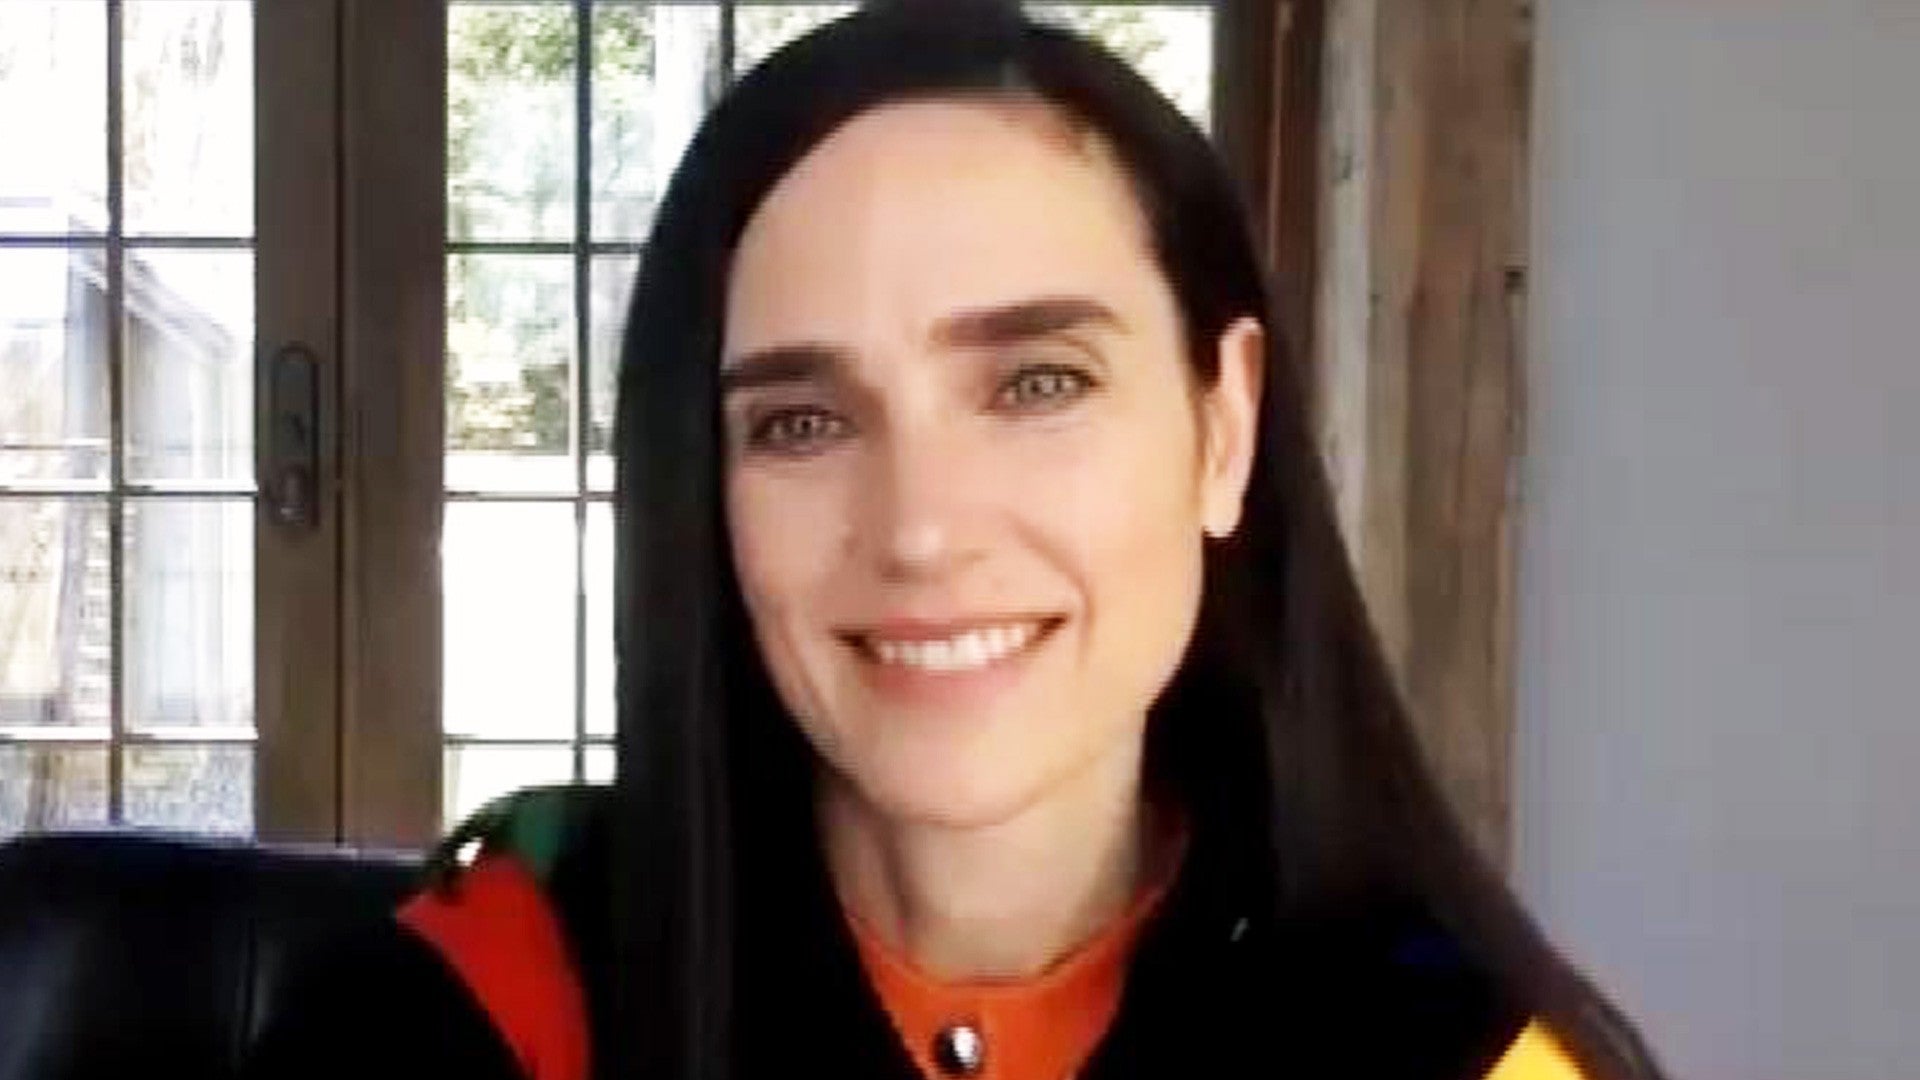 Jennifer Connelly: 'I hesitated cutting my hair for 15 years